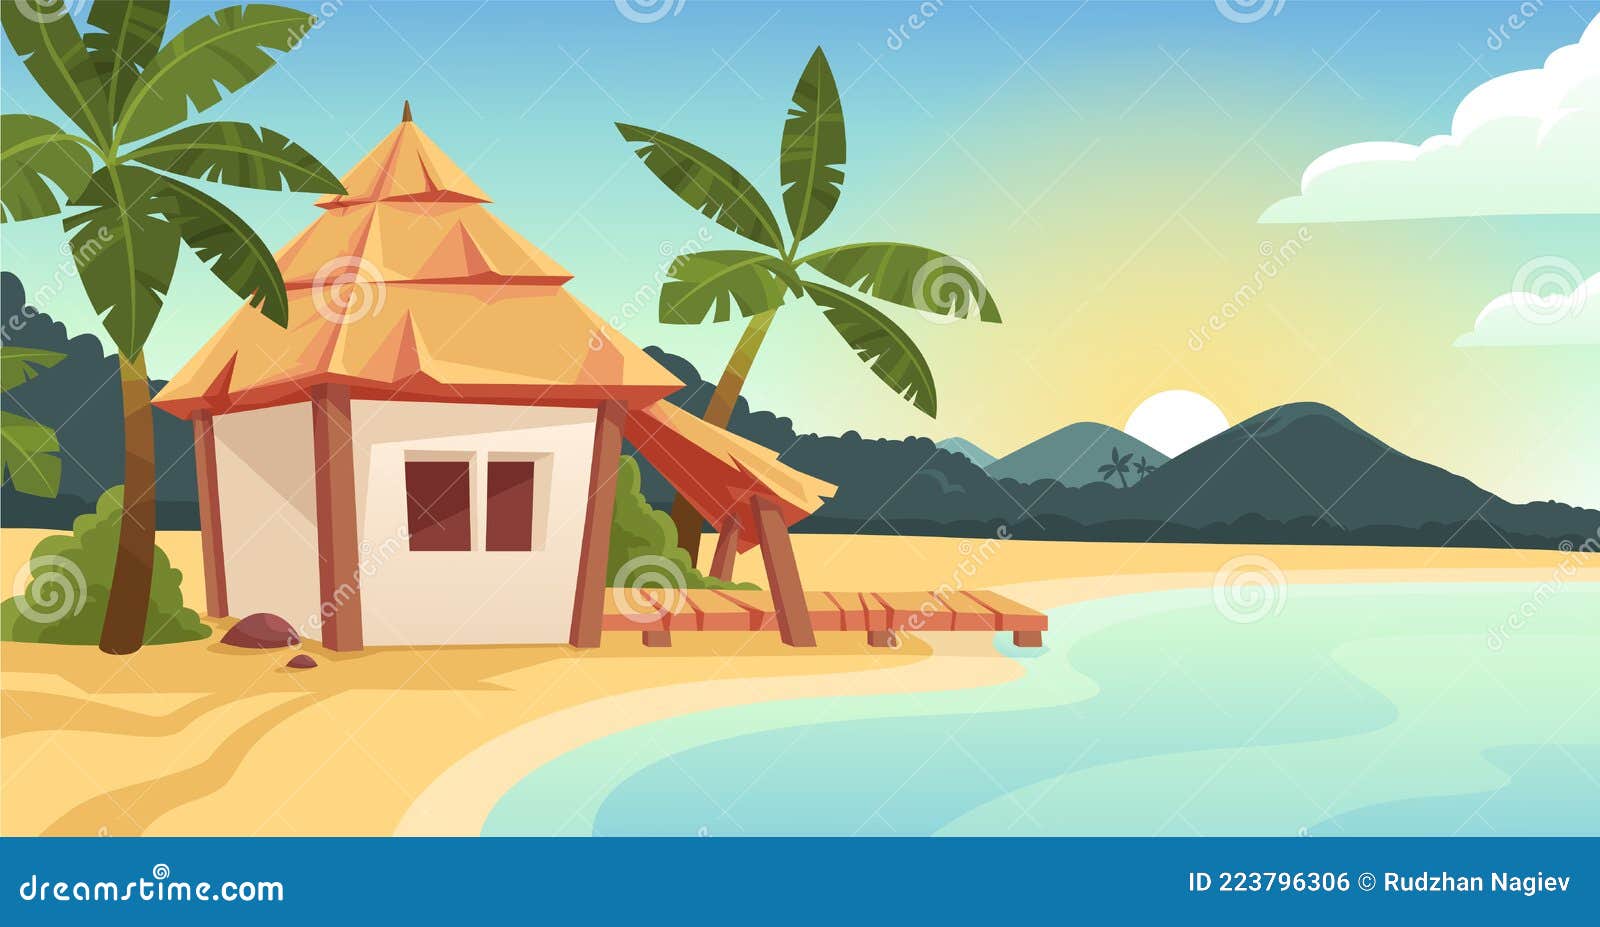 Cute Bungalow or Beach Hut on Tropical Island Resort Stock Vector ...